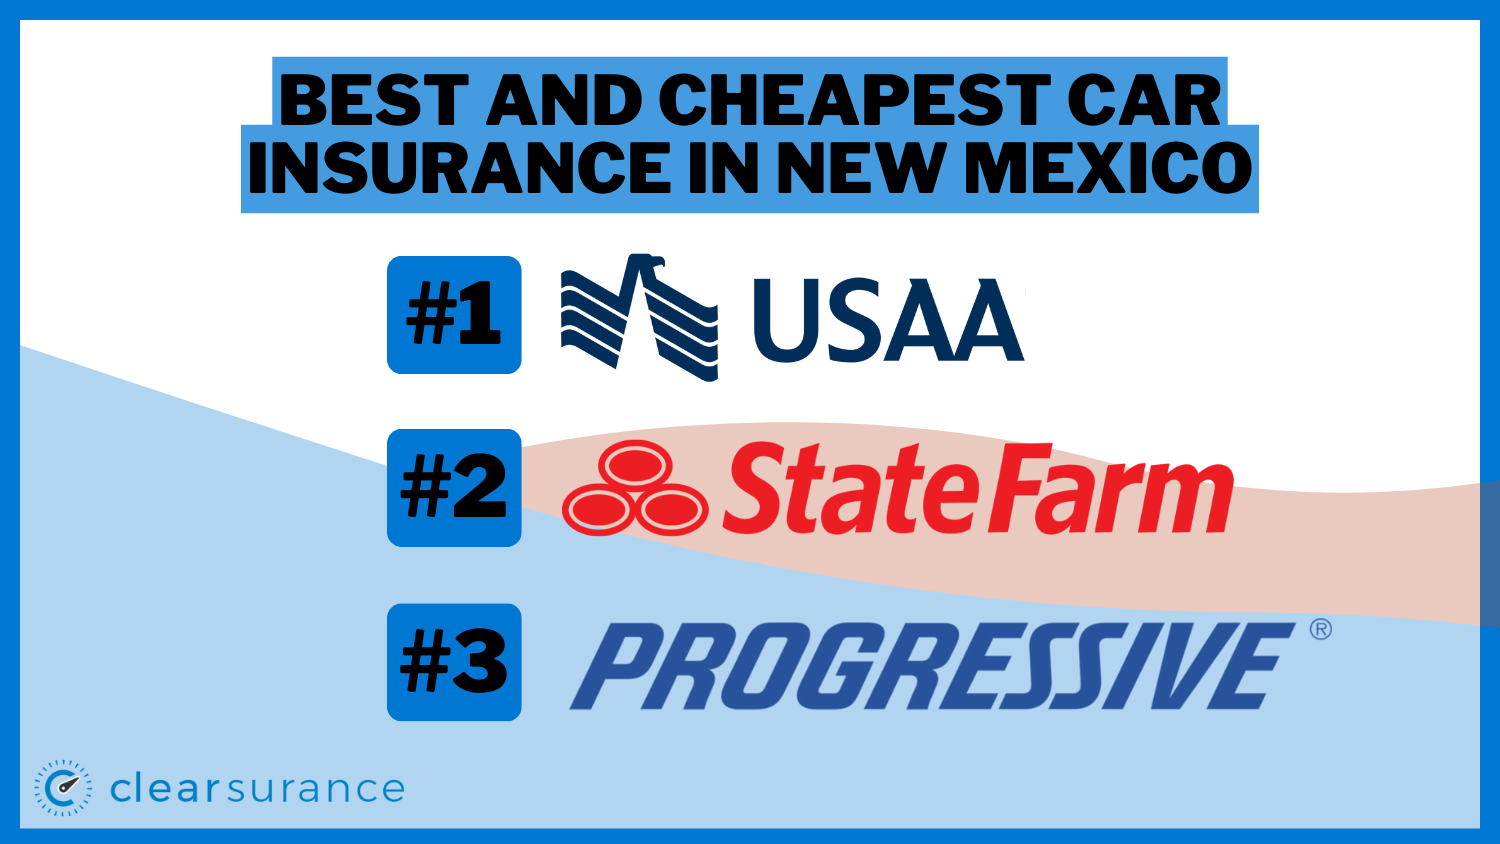 Best and Cheapest Car Insurance in New Mexico